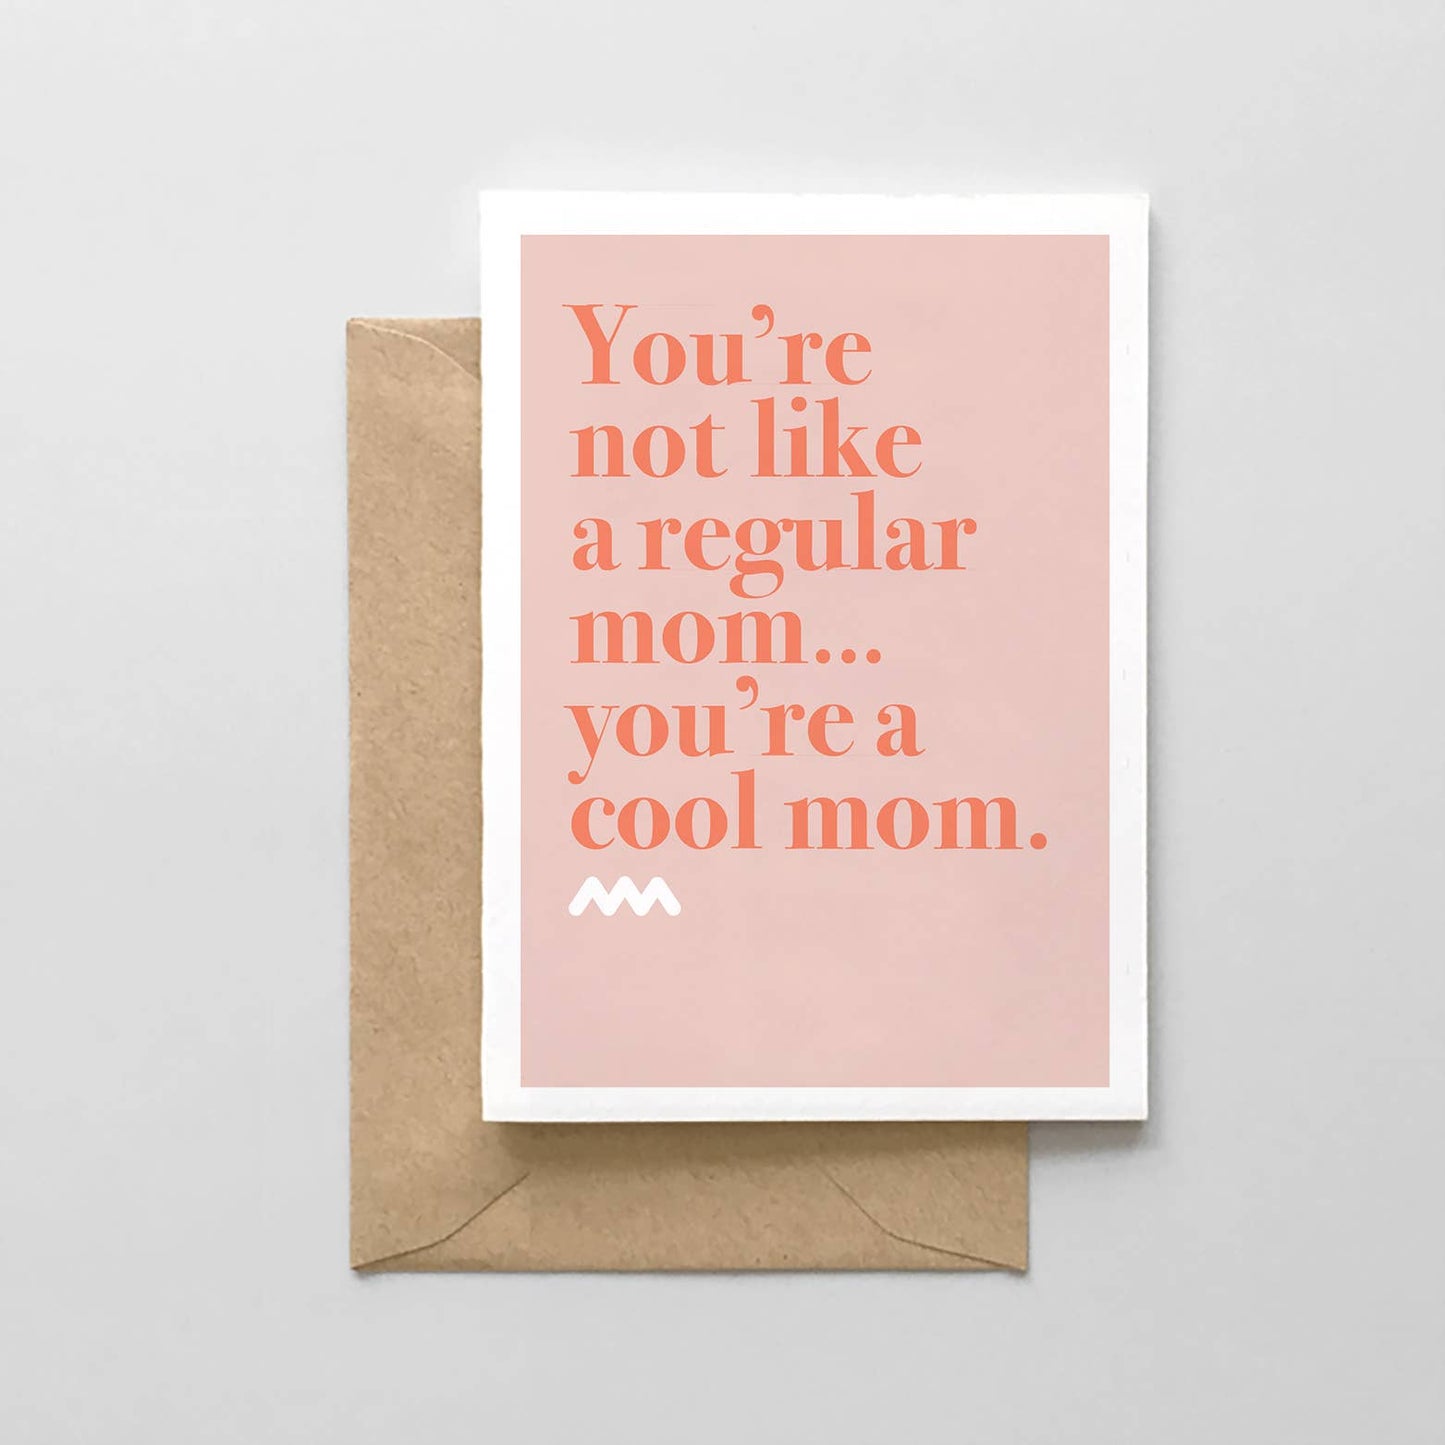 You're Not A Regular Mom, You're A Cool Mom - Mother's Day